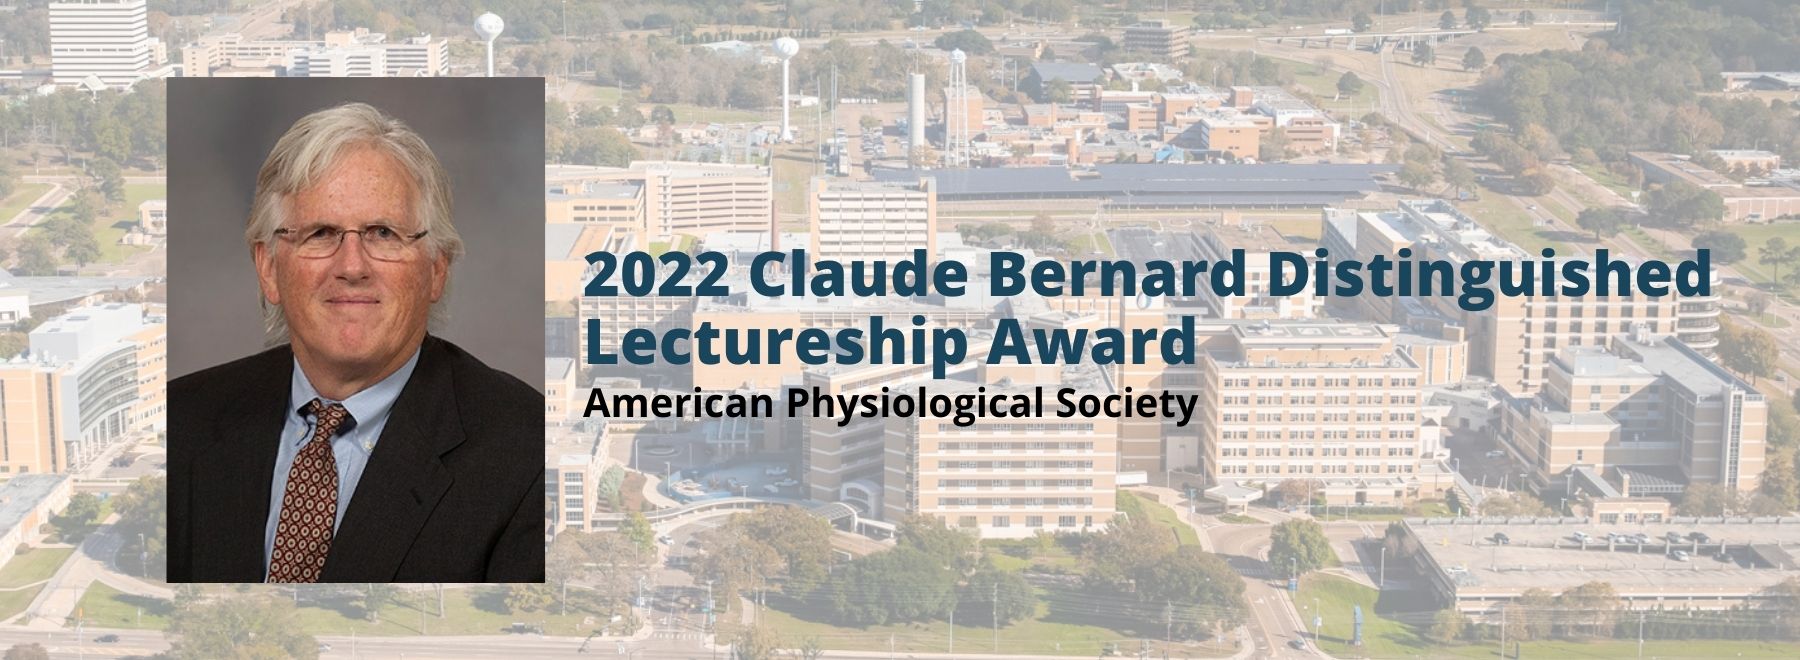 Robert Hester, PhD, is the 2022 recipient of the American Physiological Society's Claude Bernard Distinguished Lectureship Award